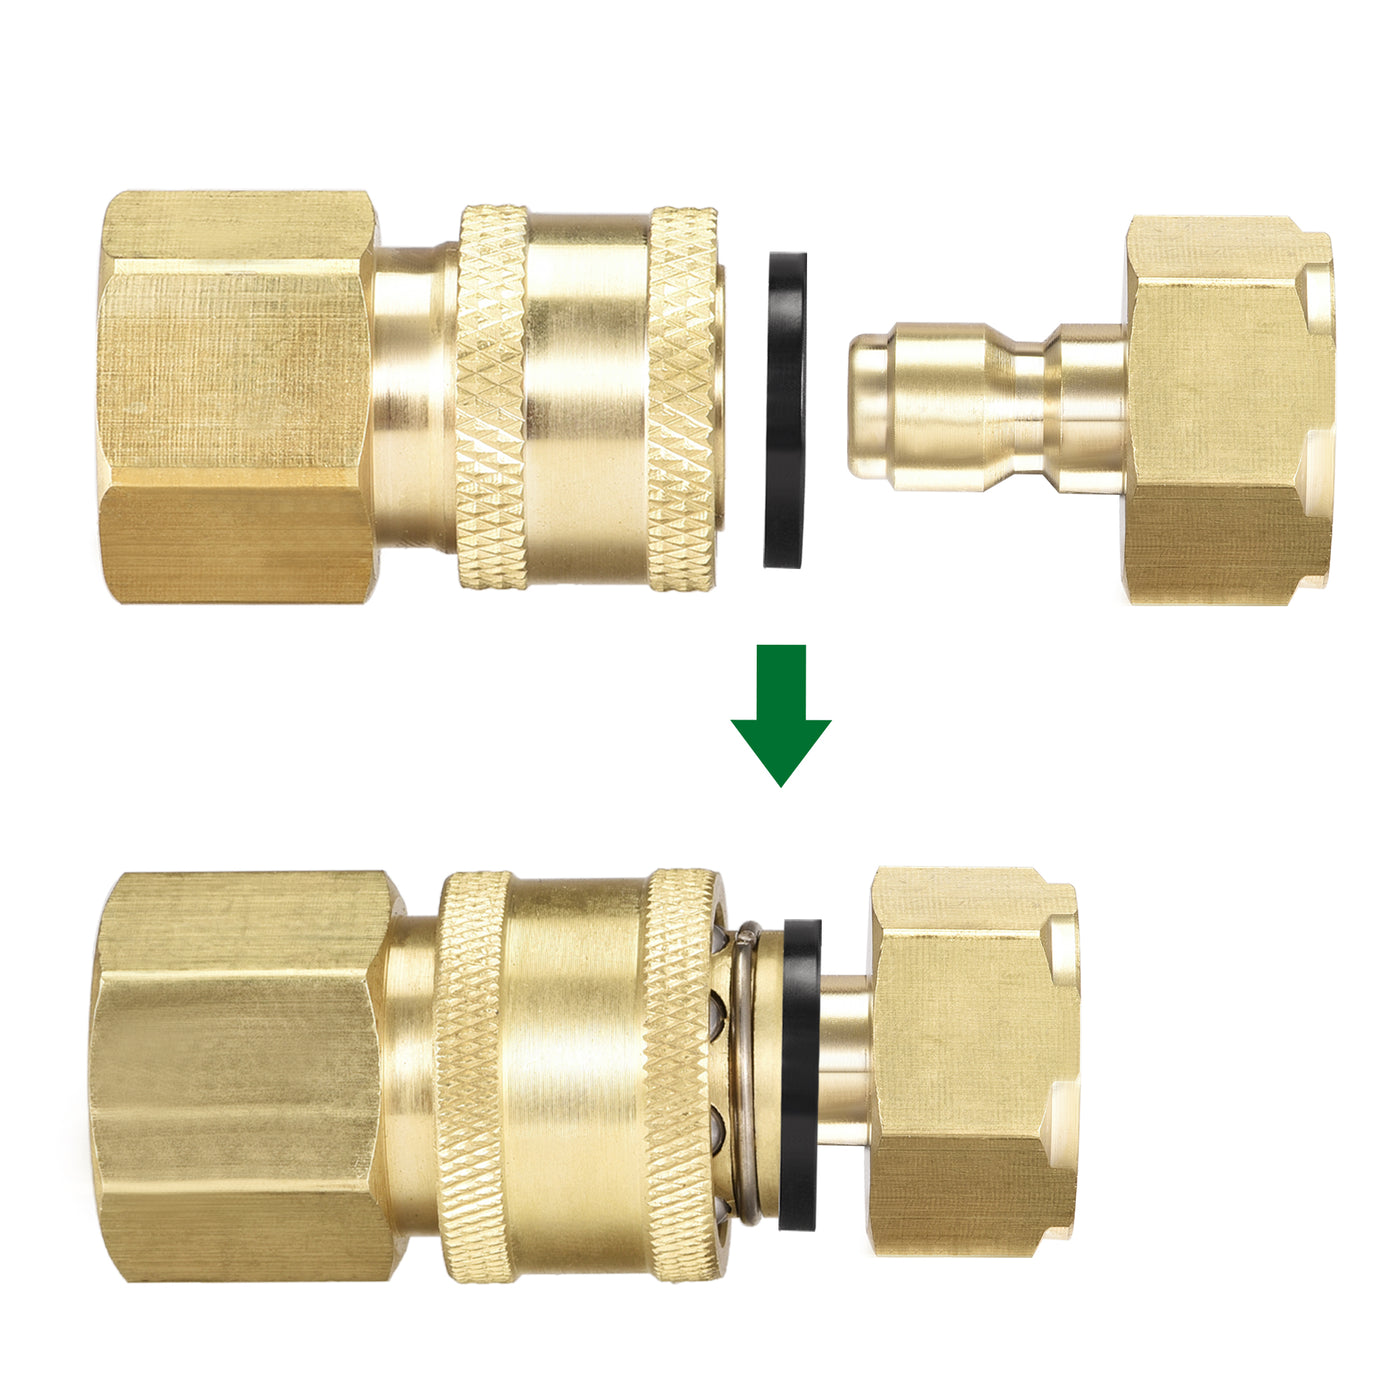 uxcell Uxcell Brass Quick Connect Set Fittings M22 & M18x1.5 Female Thread